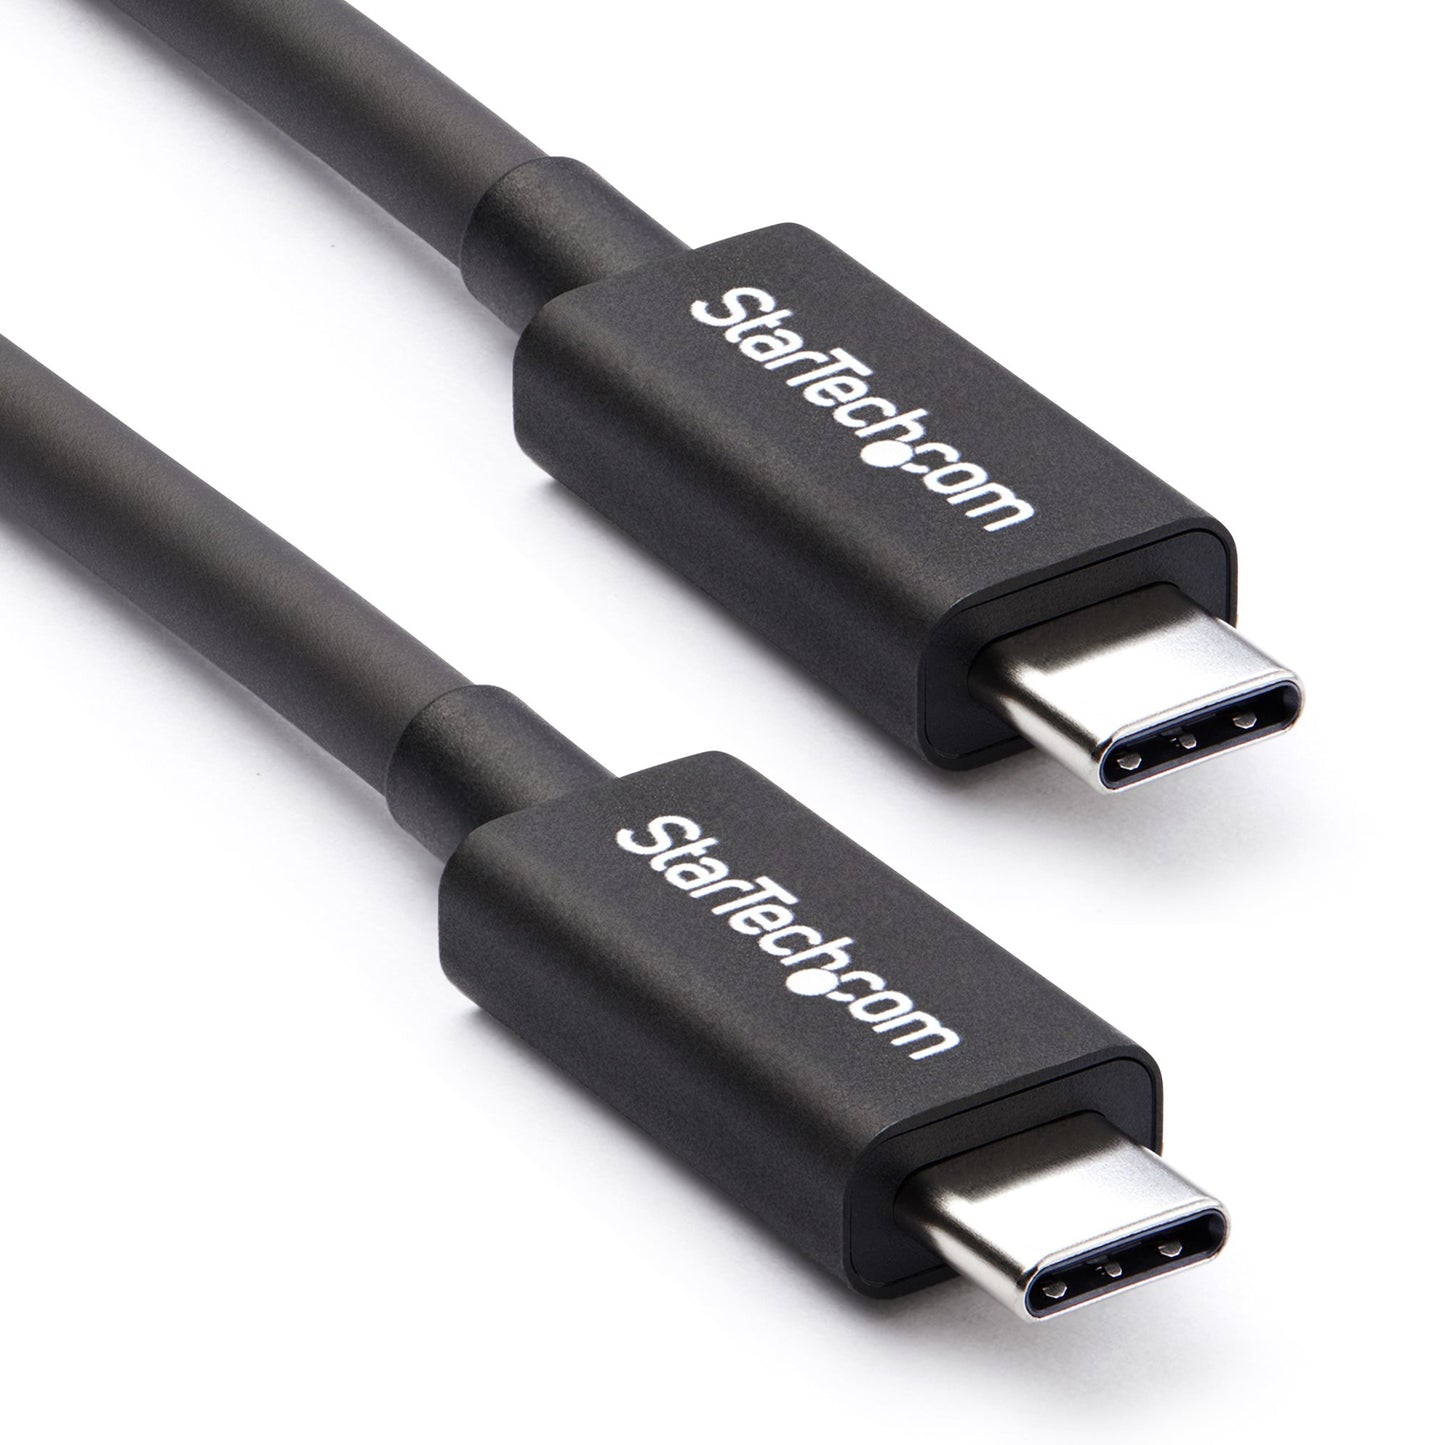 StarTech.com 2m Thunderbolt 3 (20Gbps) USB-C Cable - Thunderbolt, USB, and DisplayPort Compatible-0